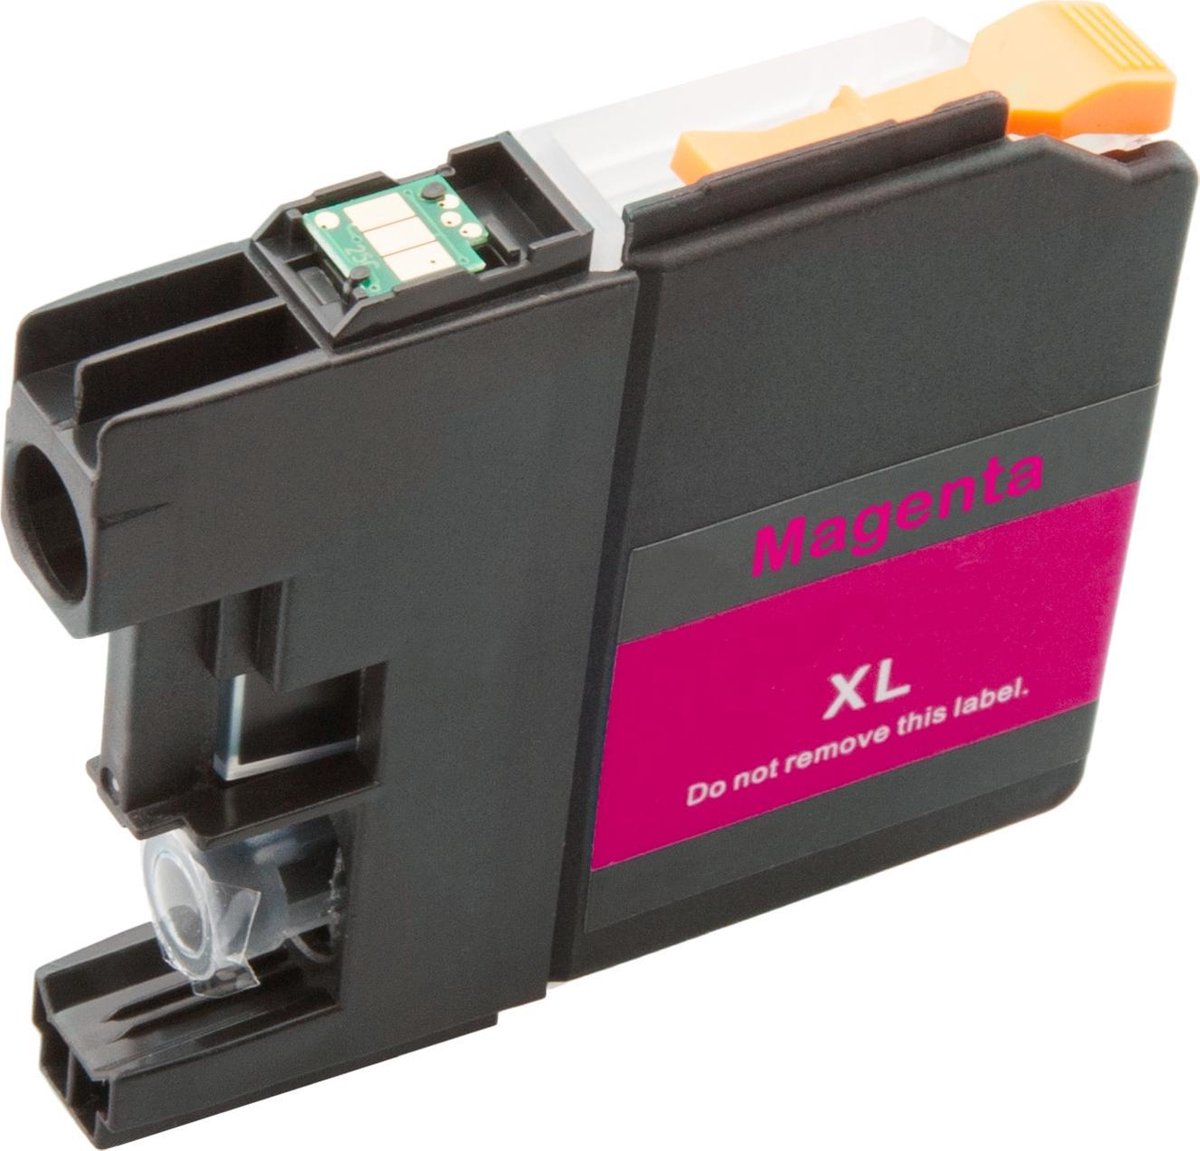 ActiveJet AB-123MN inkt voor brother printer; Brother LC123M / LC121M Vervanging; Opperste; 10 ml; magenta.